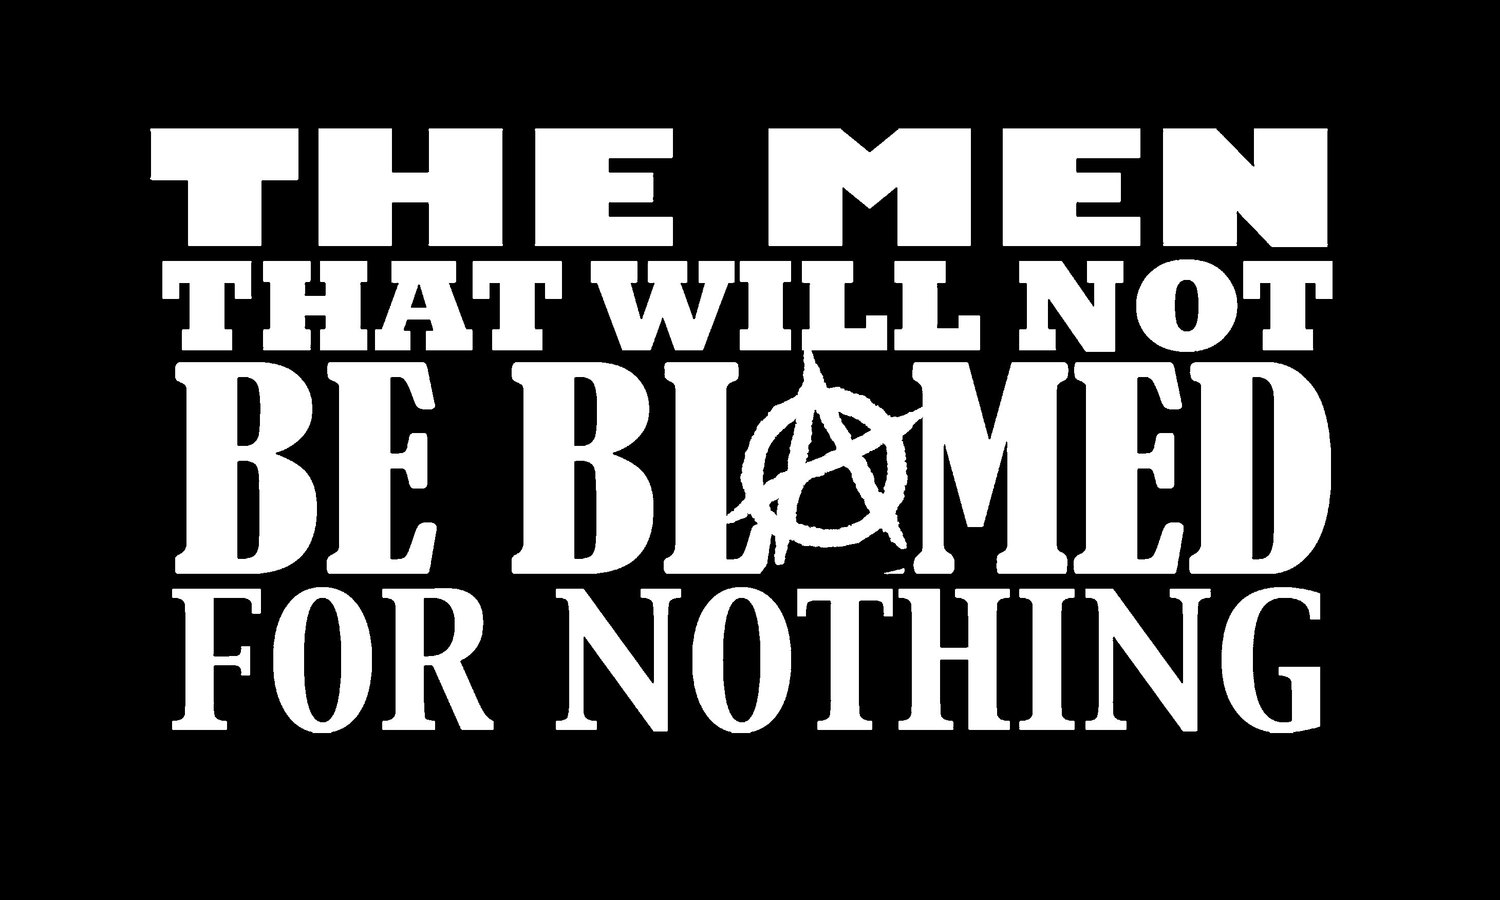 The Men That Will not be blamed for nothing